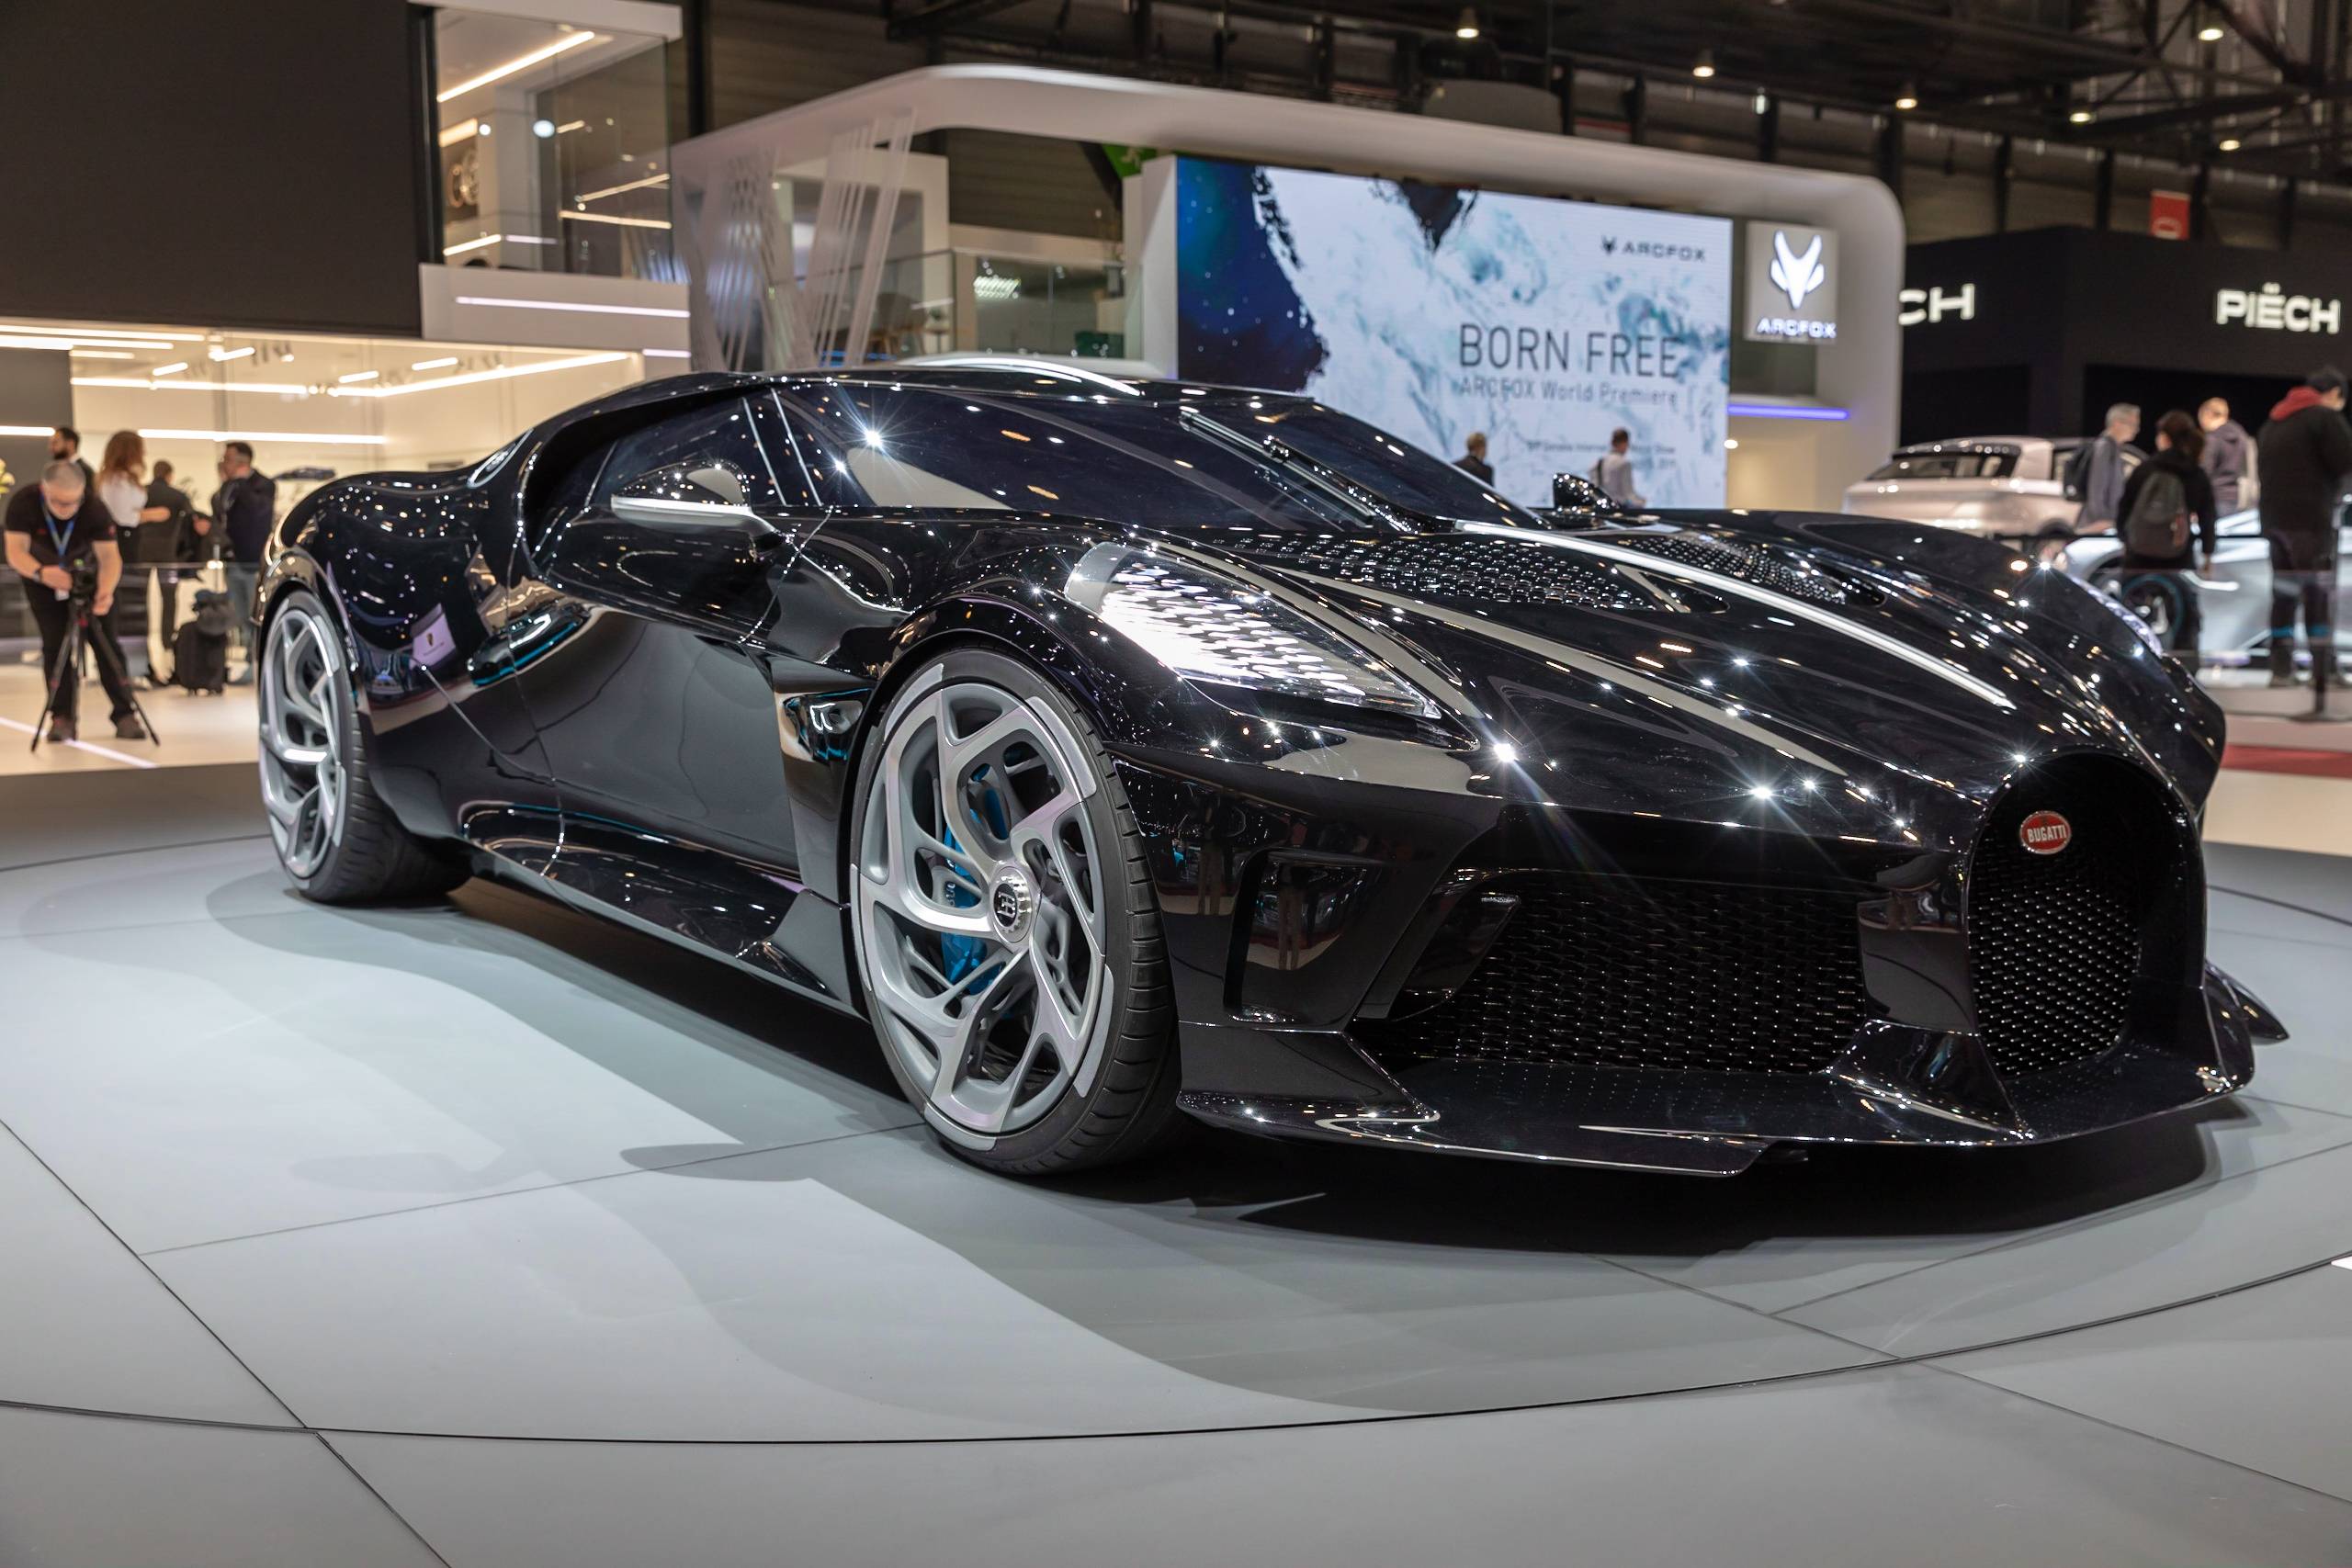 The 10 Most Expensive & Rare Cars in The World